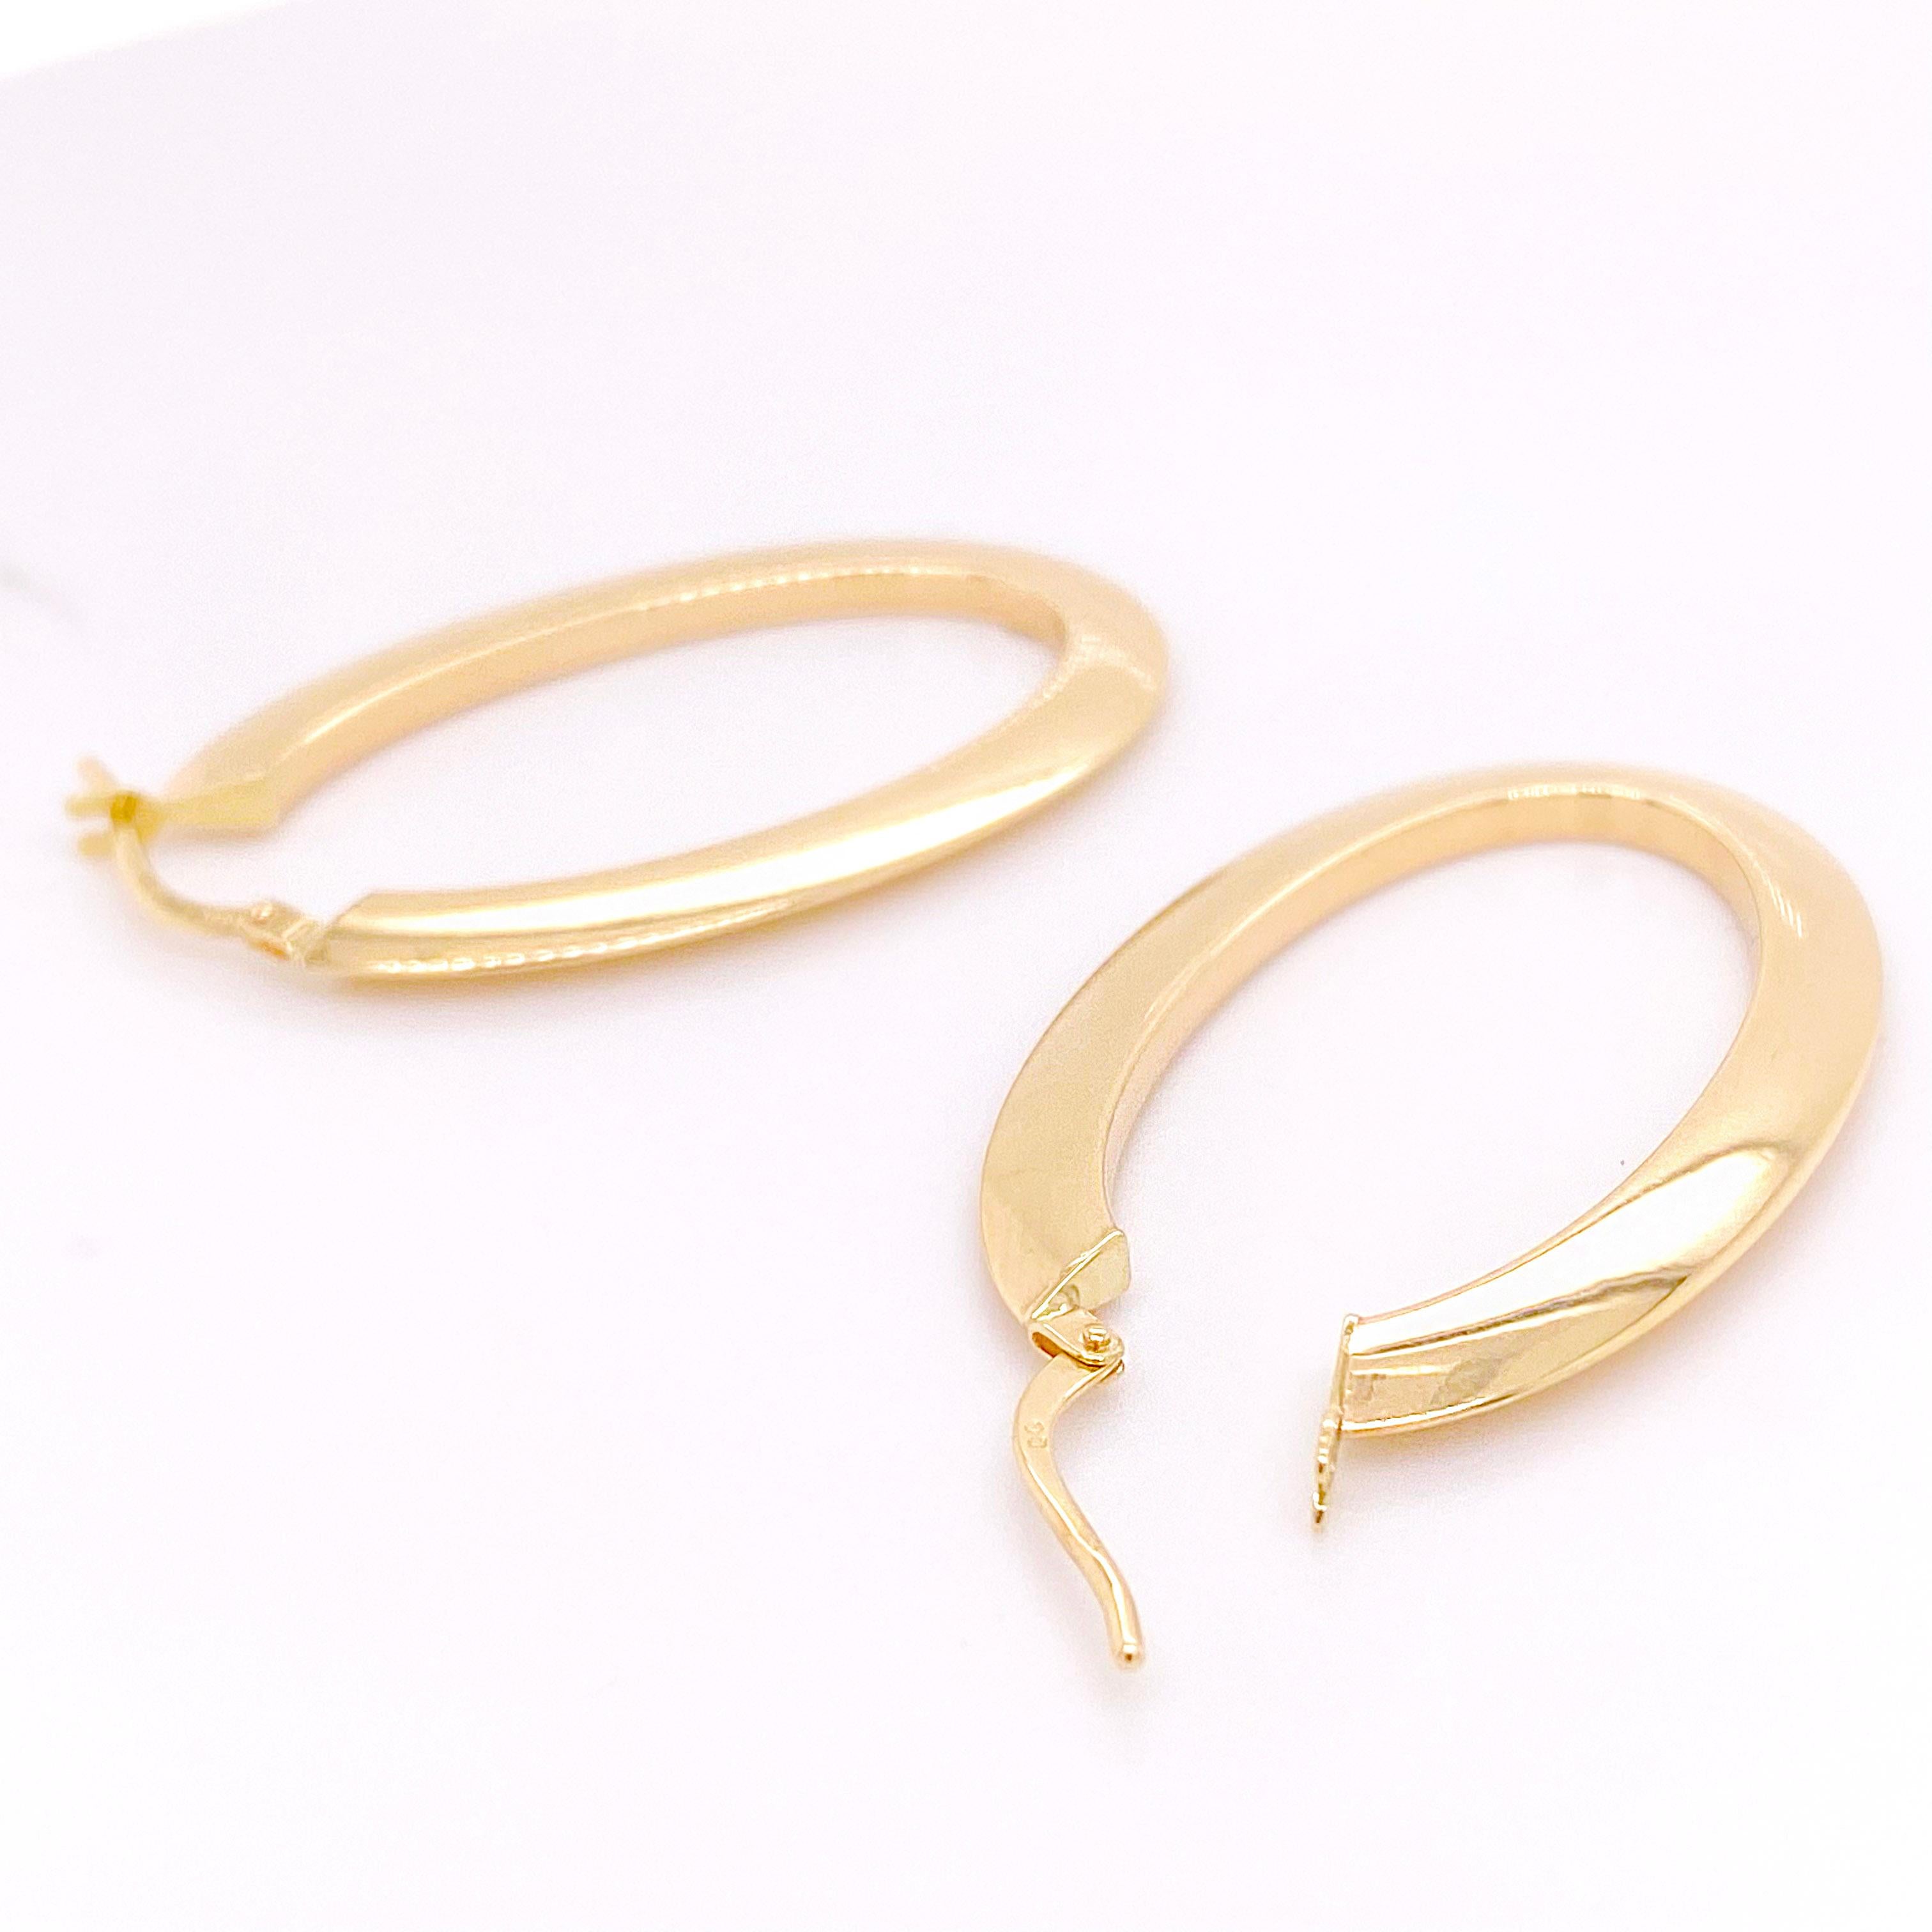 The oval hoop is the latest hoop earring you need to acquire. This earring is the latest version of the hoop earring .The earring is light so that it does not pull on your earlobes and the 1.5 inch length is perfect for short, medium or long hair.